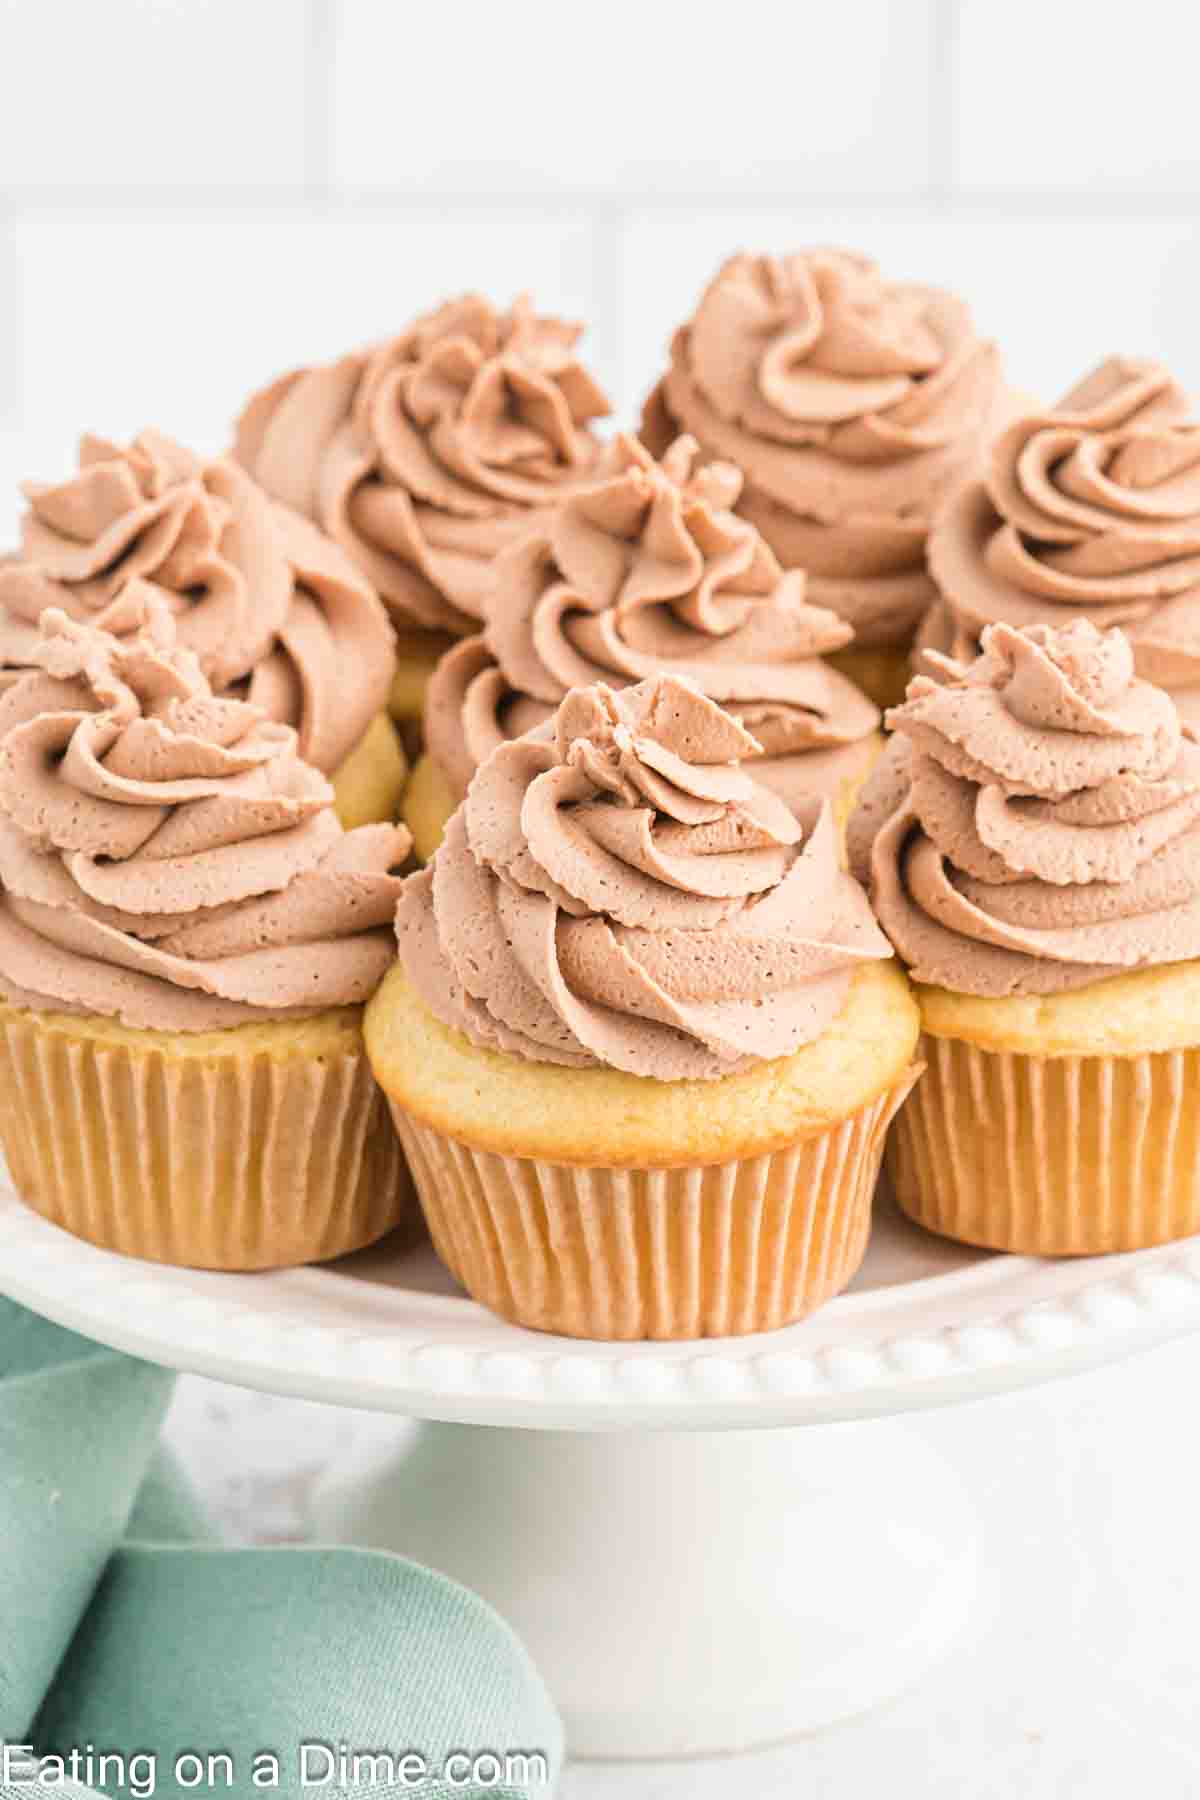 Cupcakes frosted with nutella frosting